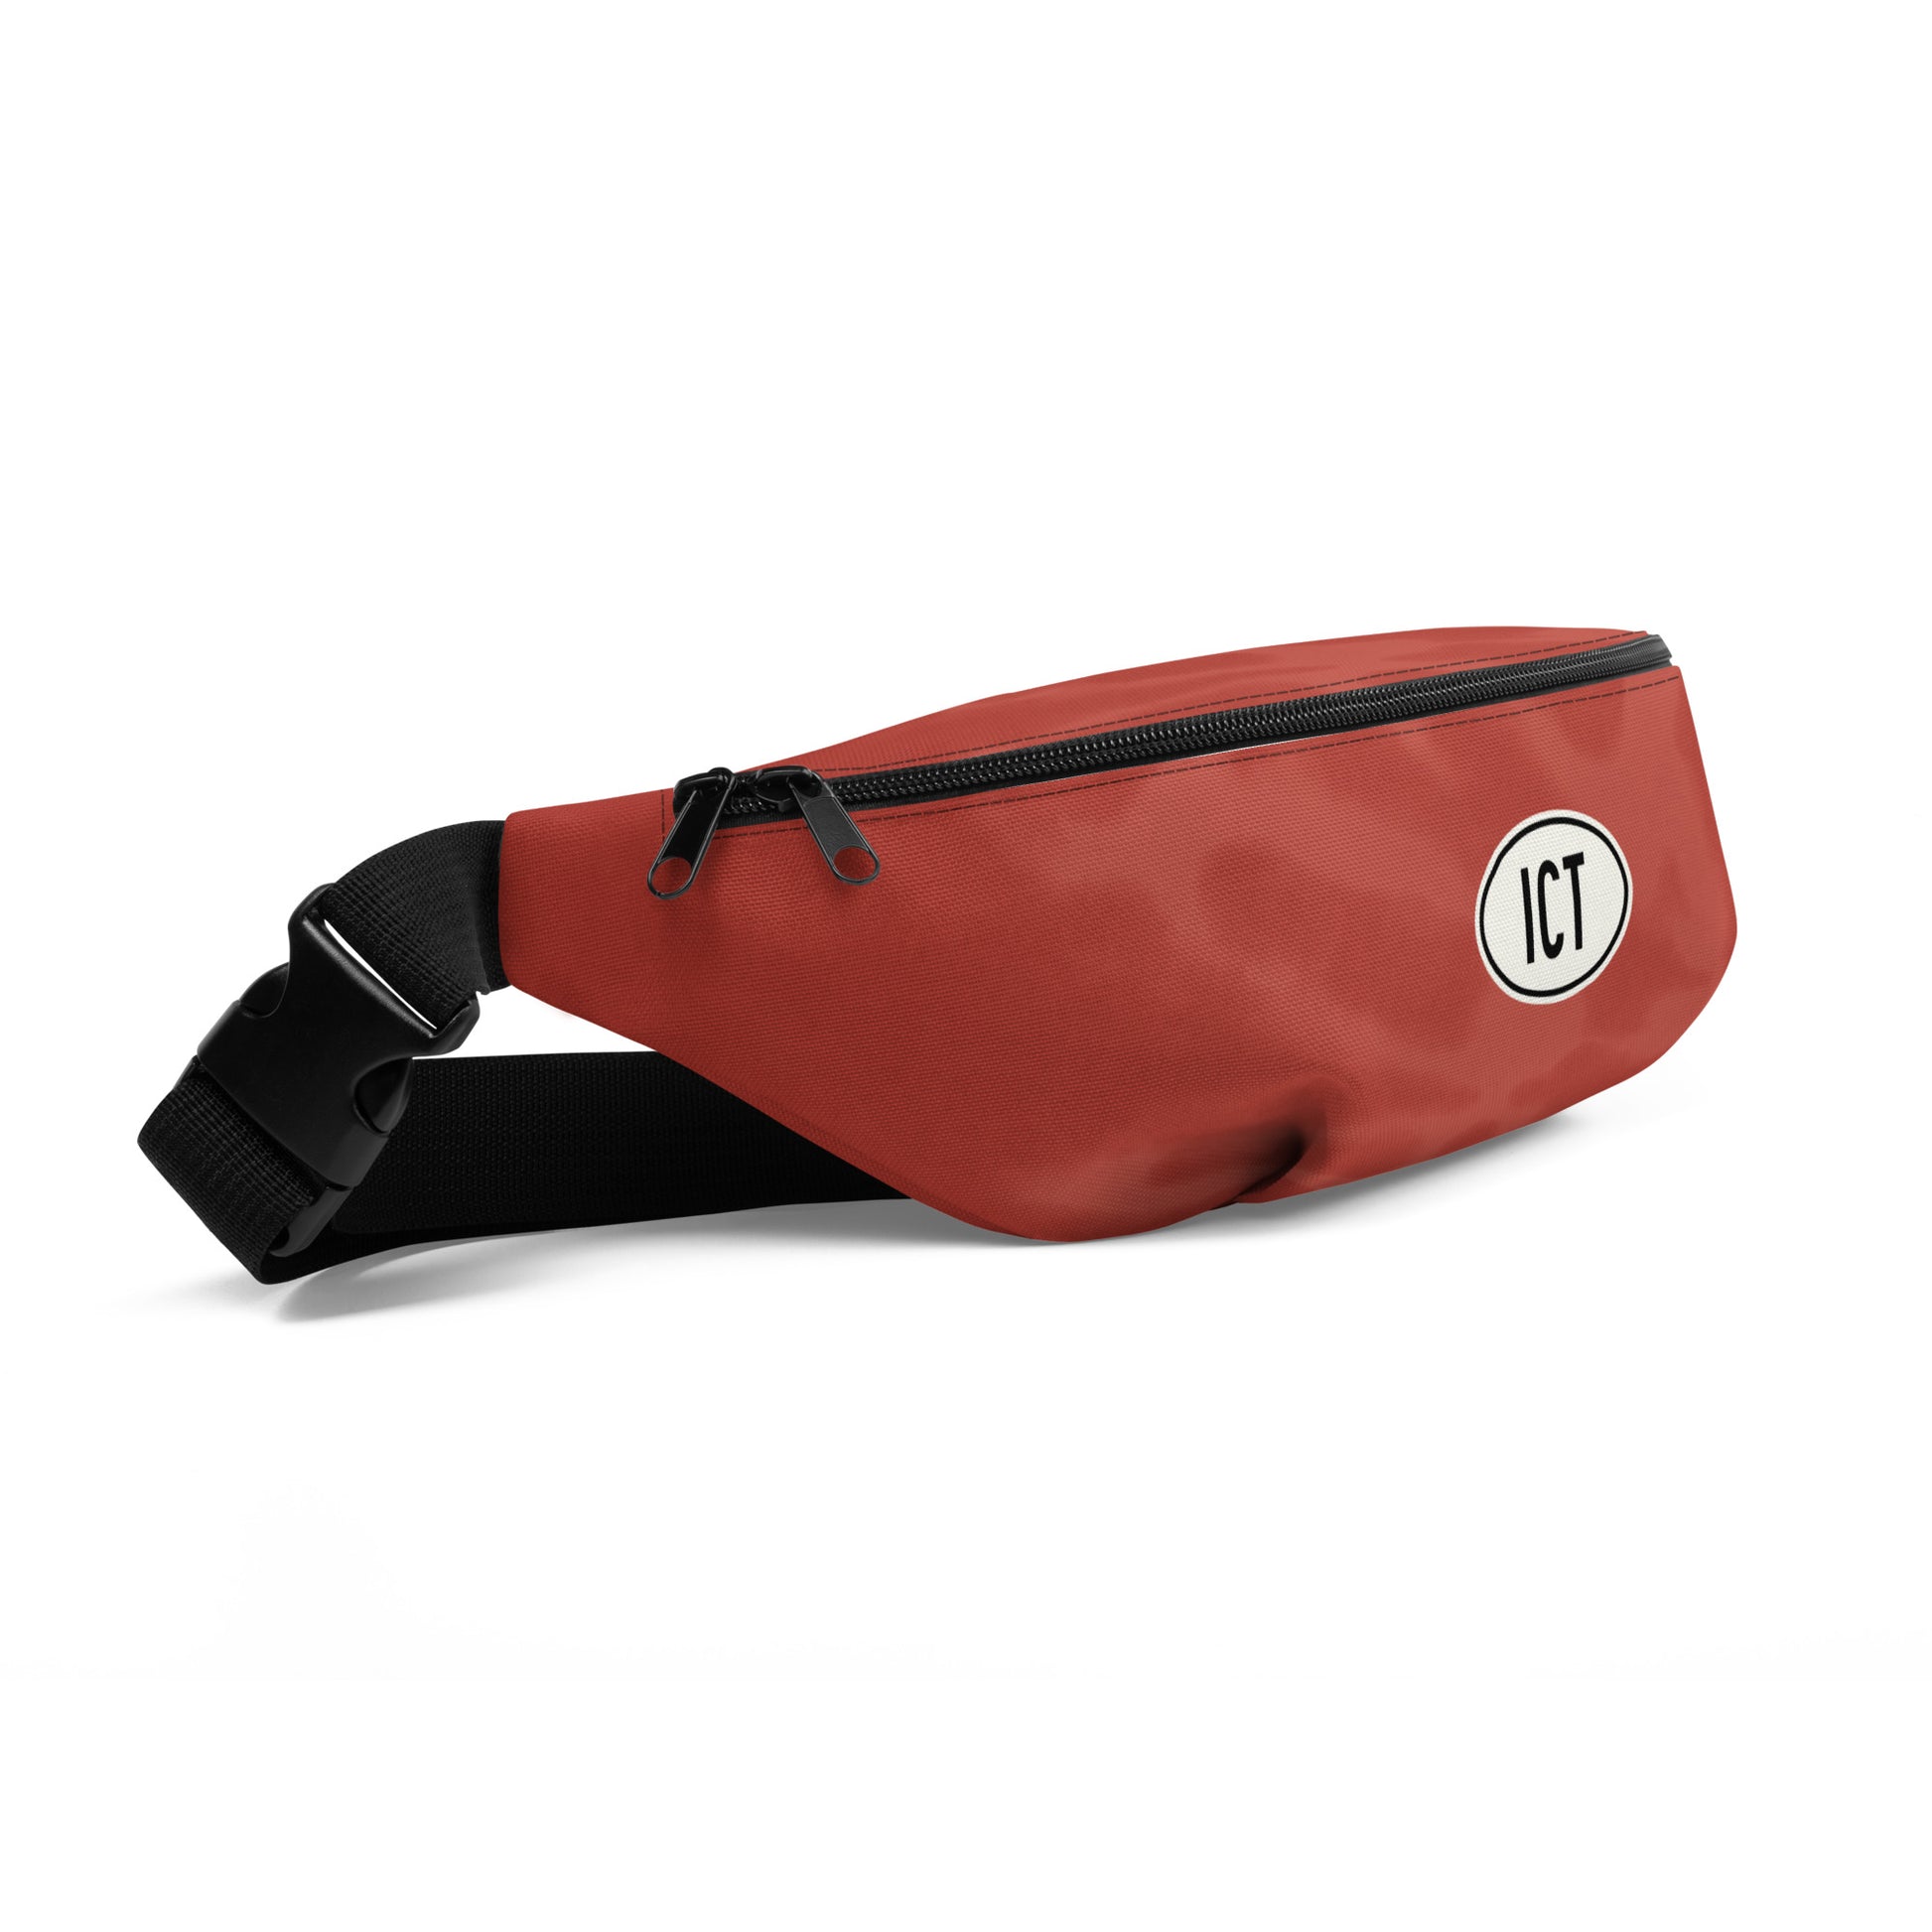 Travel Gift Fanny Pack - Red Tie-Dye • ICT Wichita • YHM Designs - Image 07